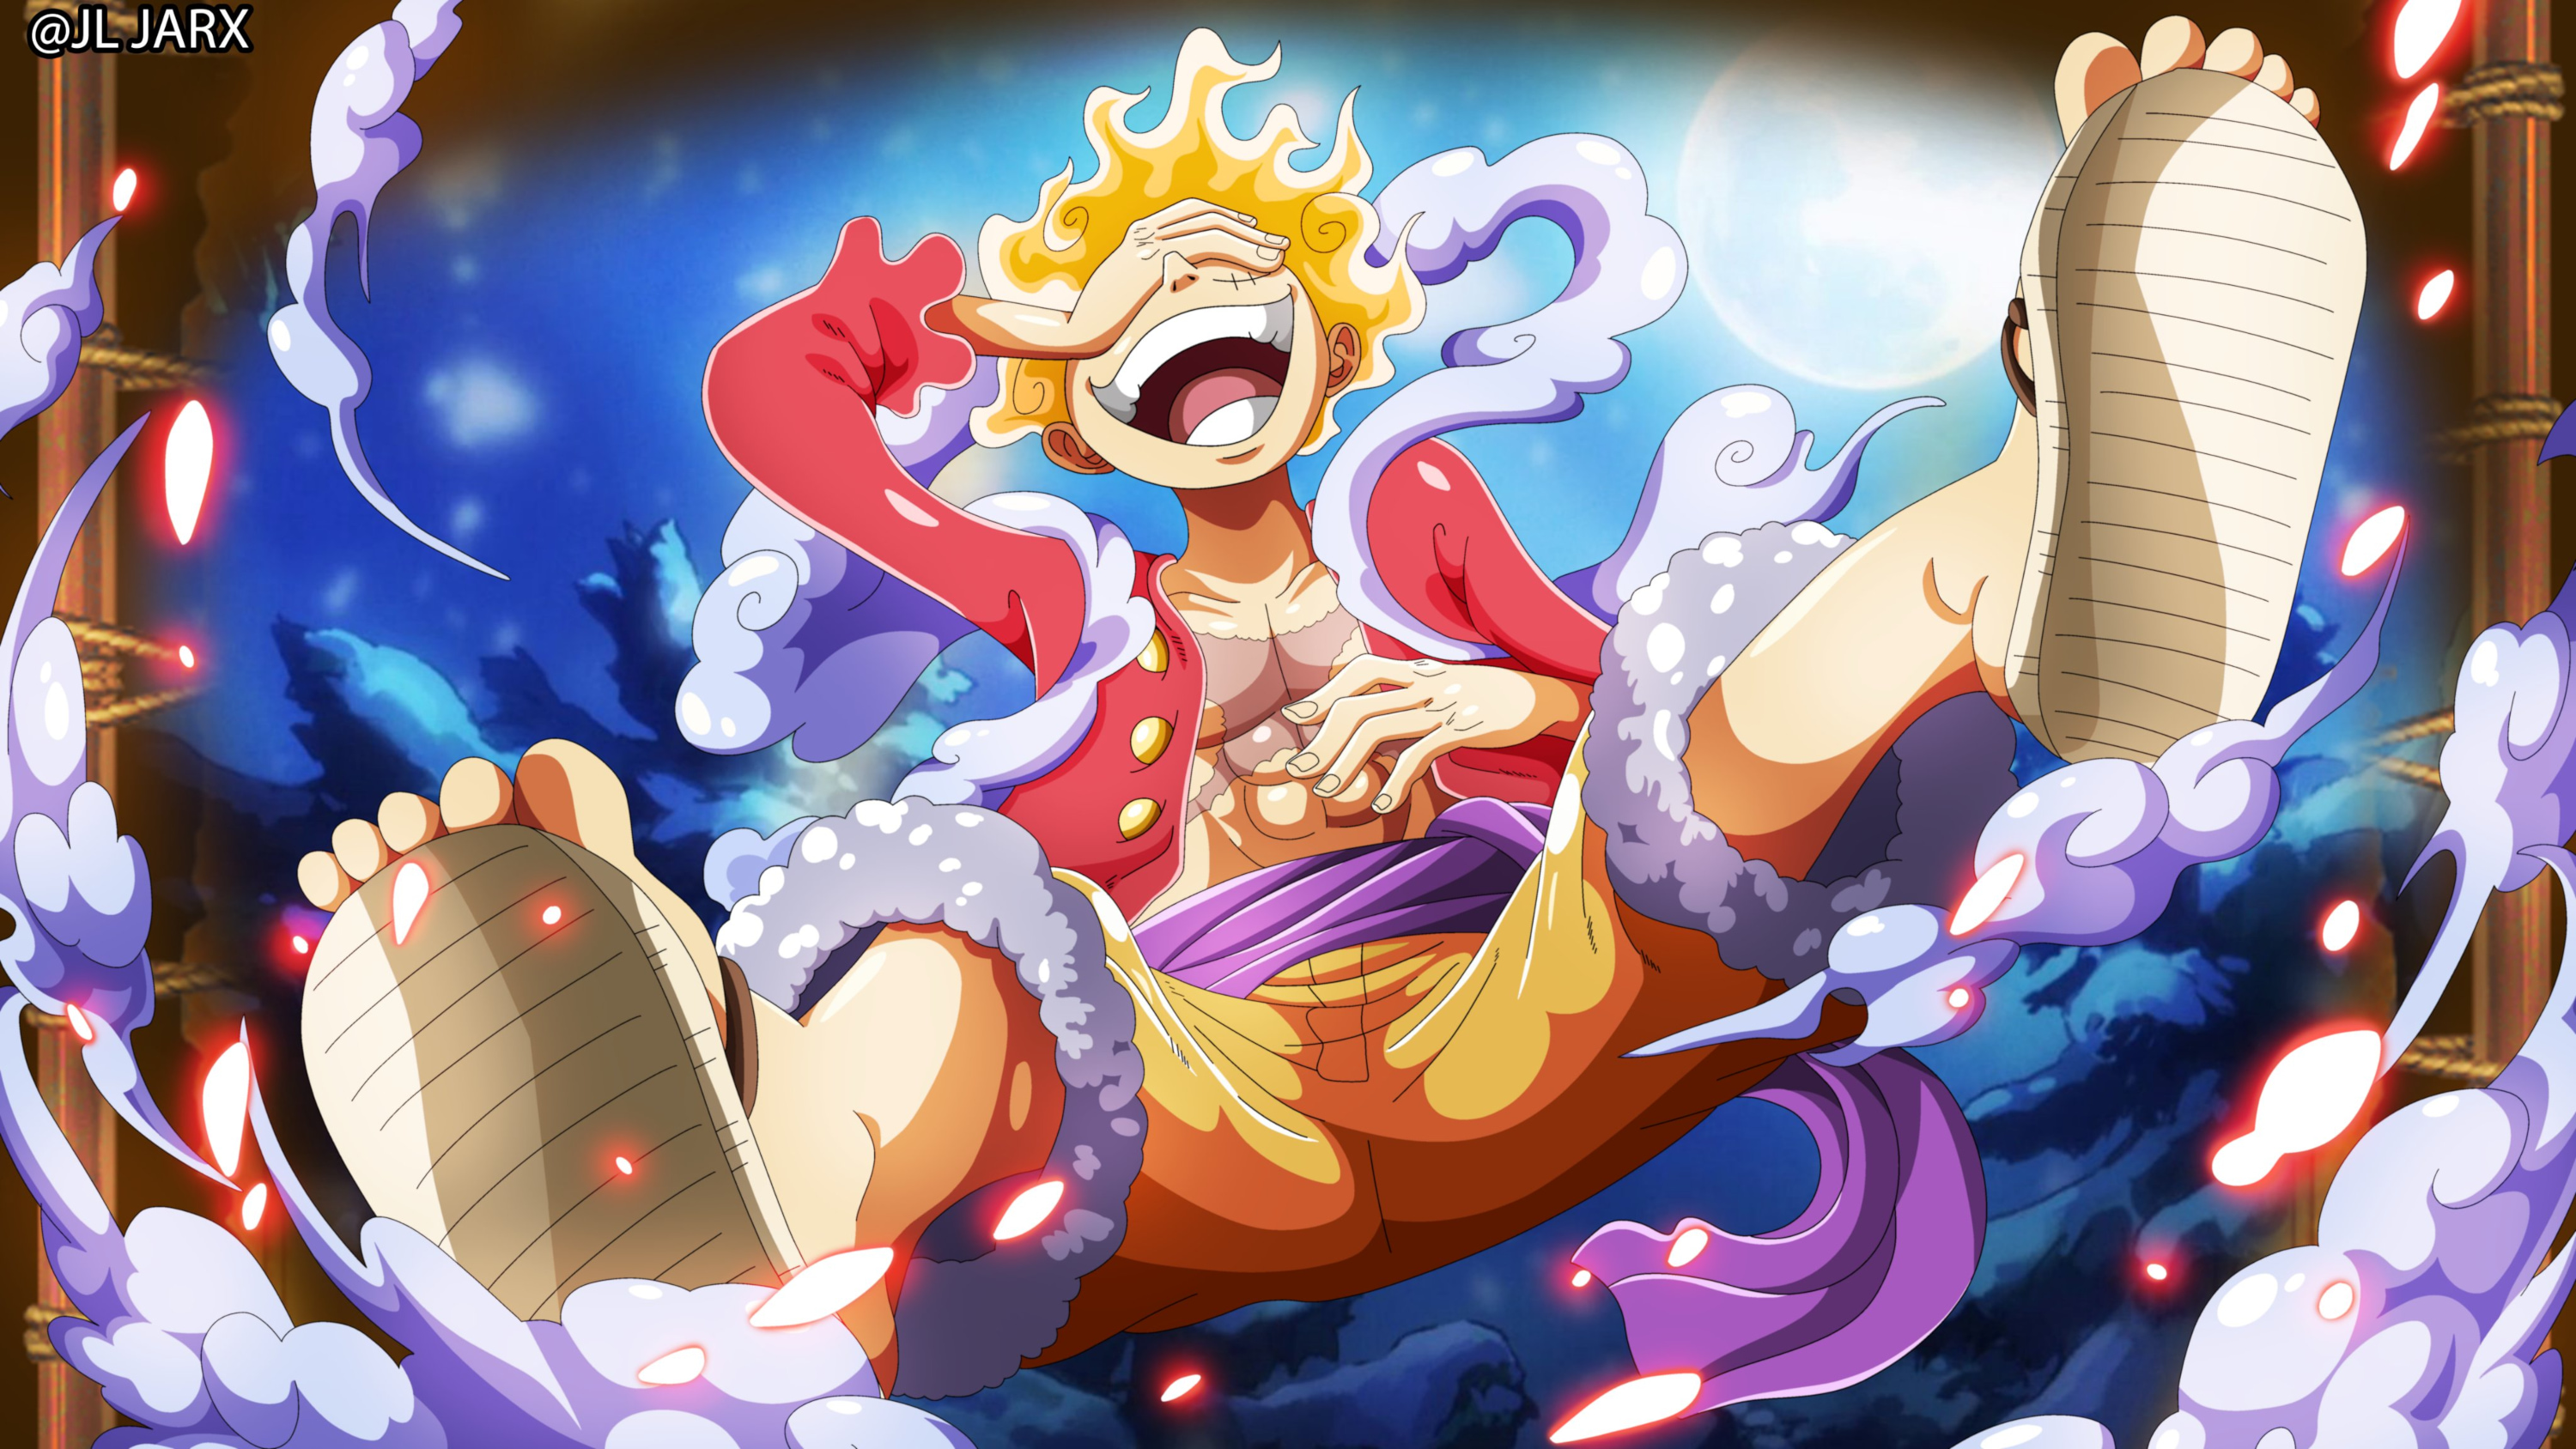 1507 anh luffy gear 5 one piece chat luong cao2